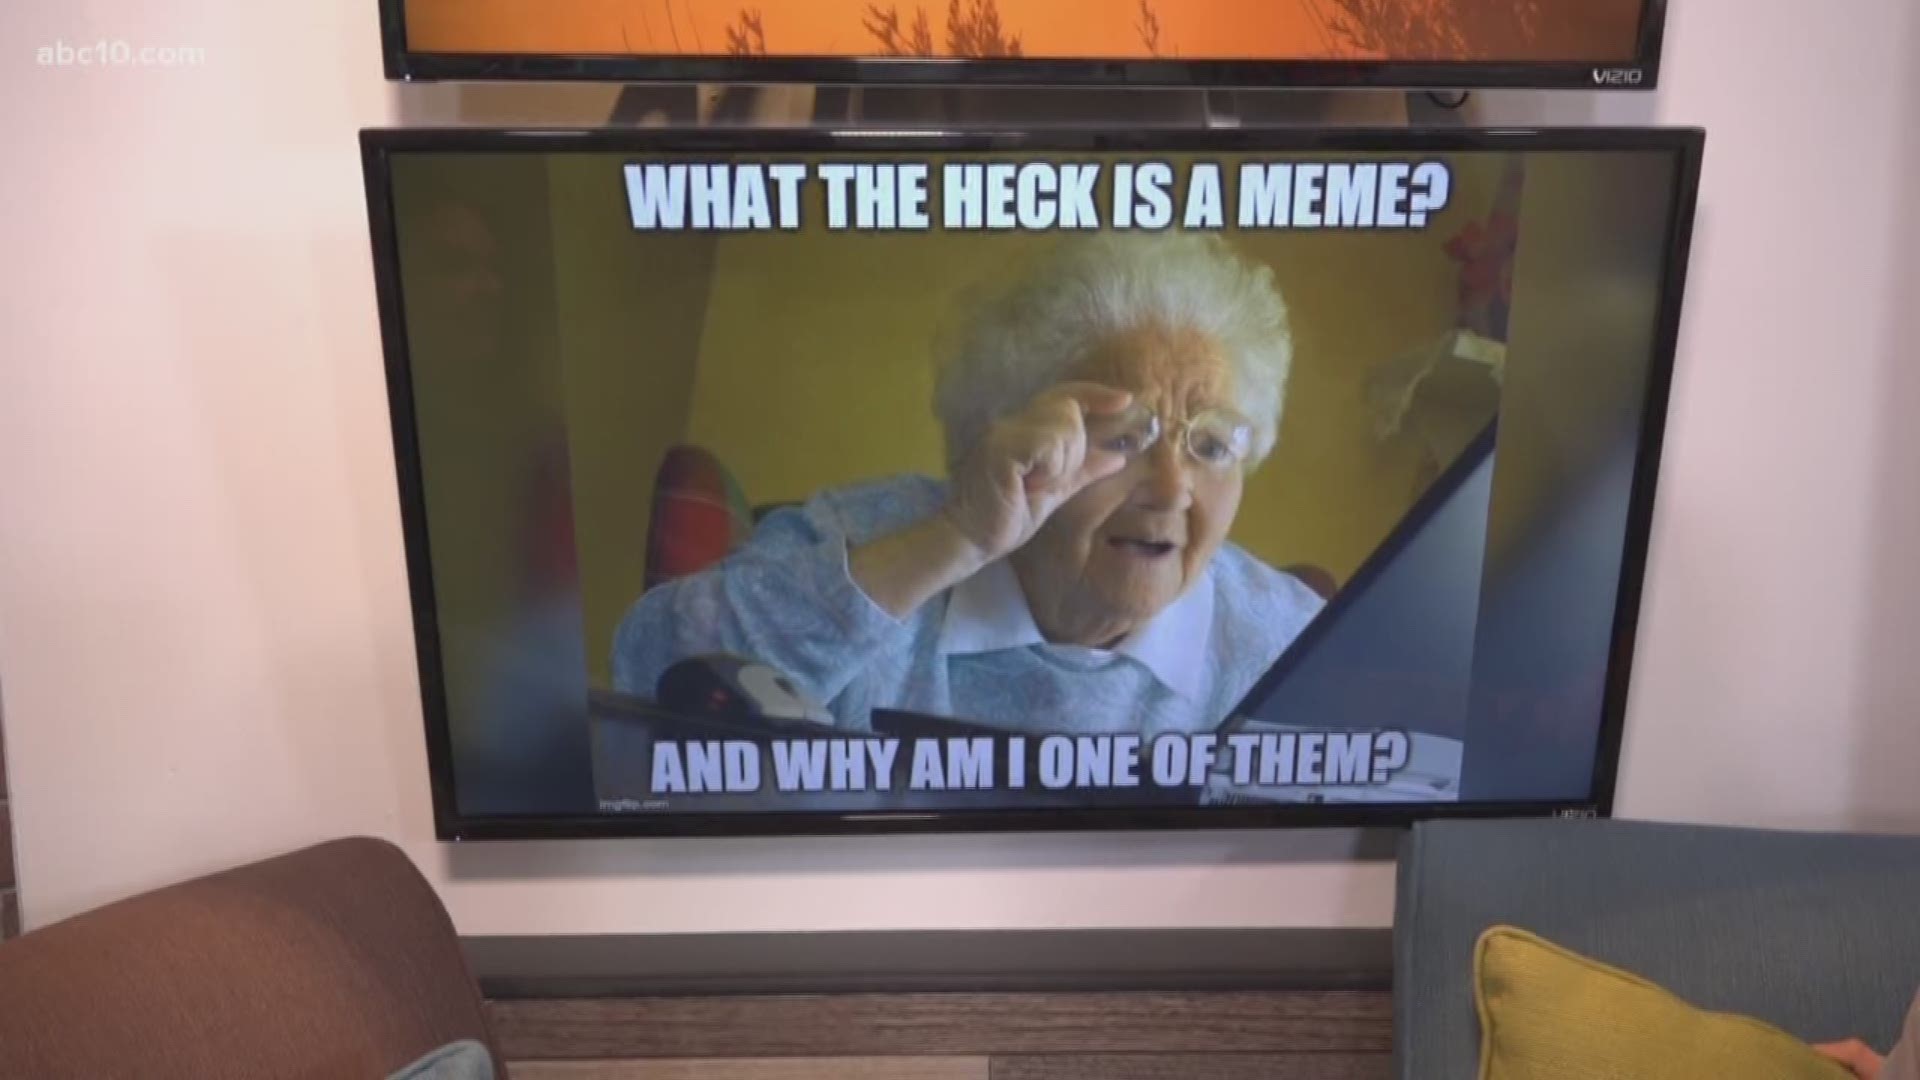 Futurist and author Anne Ahola Ward talks about how memes can help brands connect with people, if used the right way.